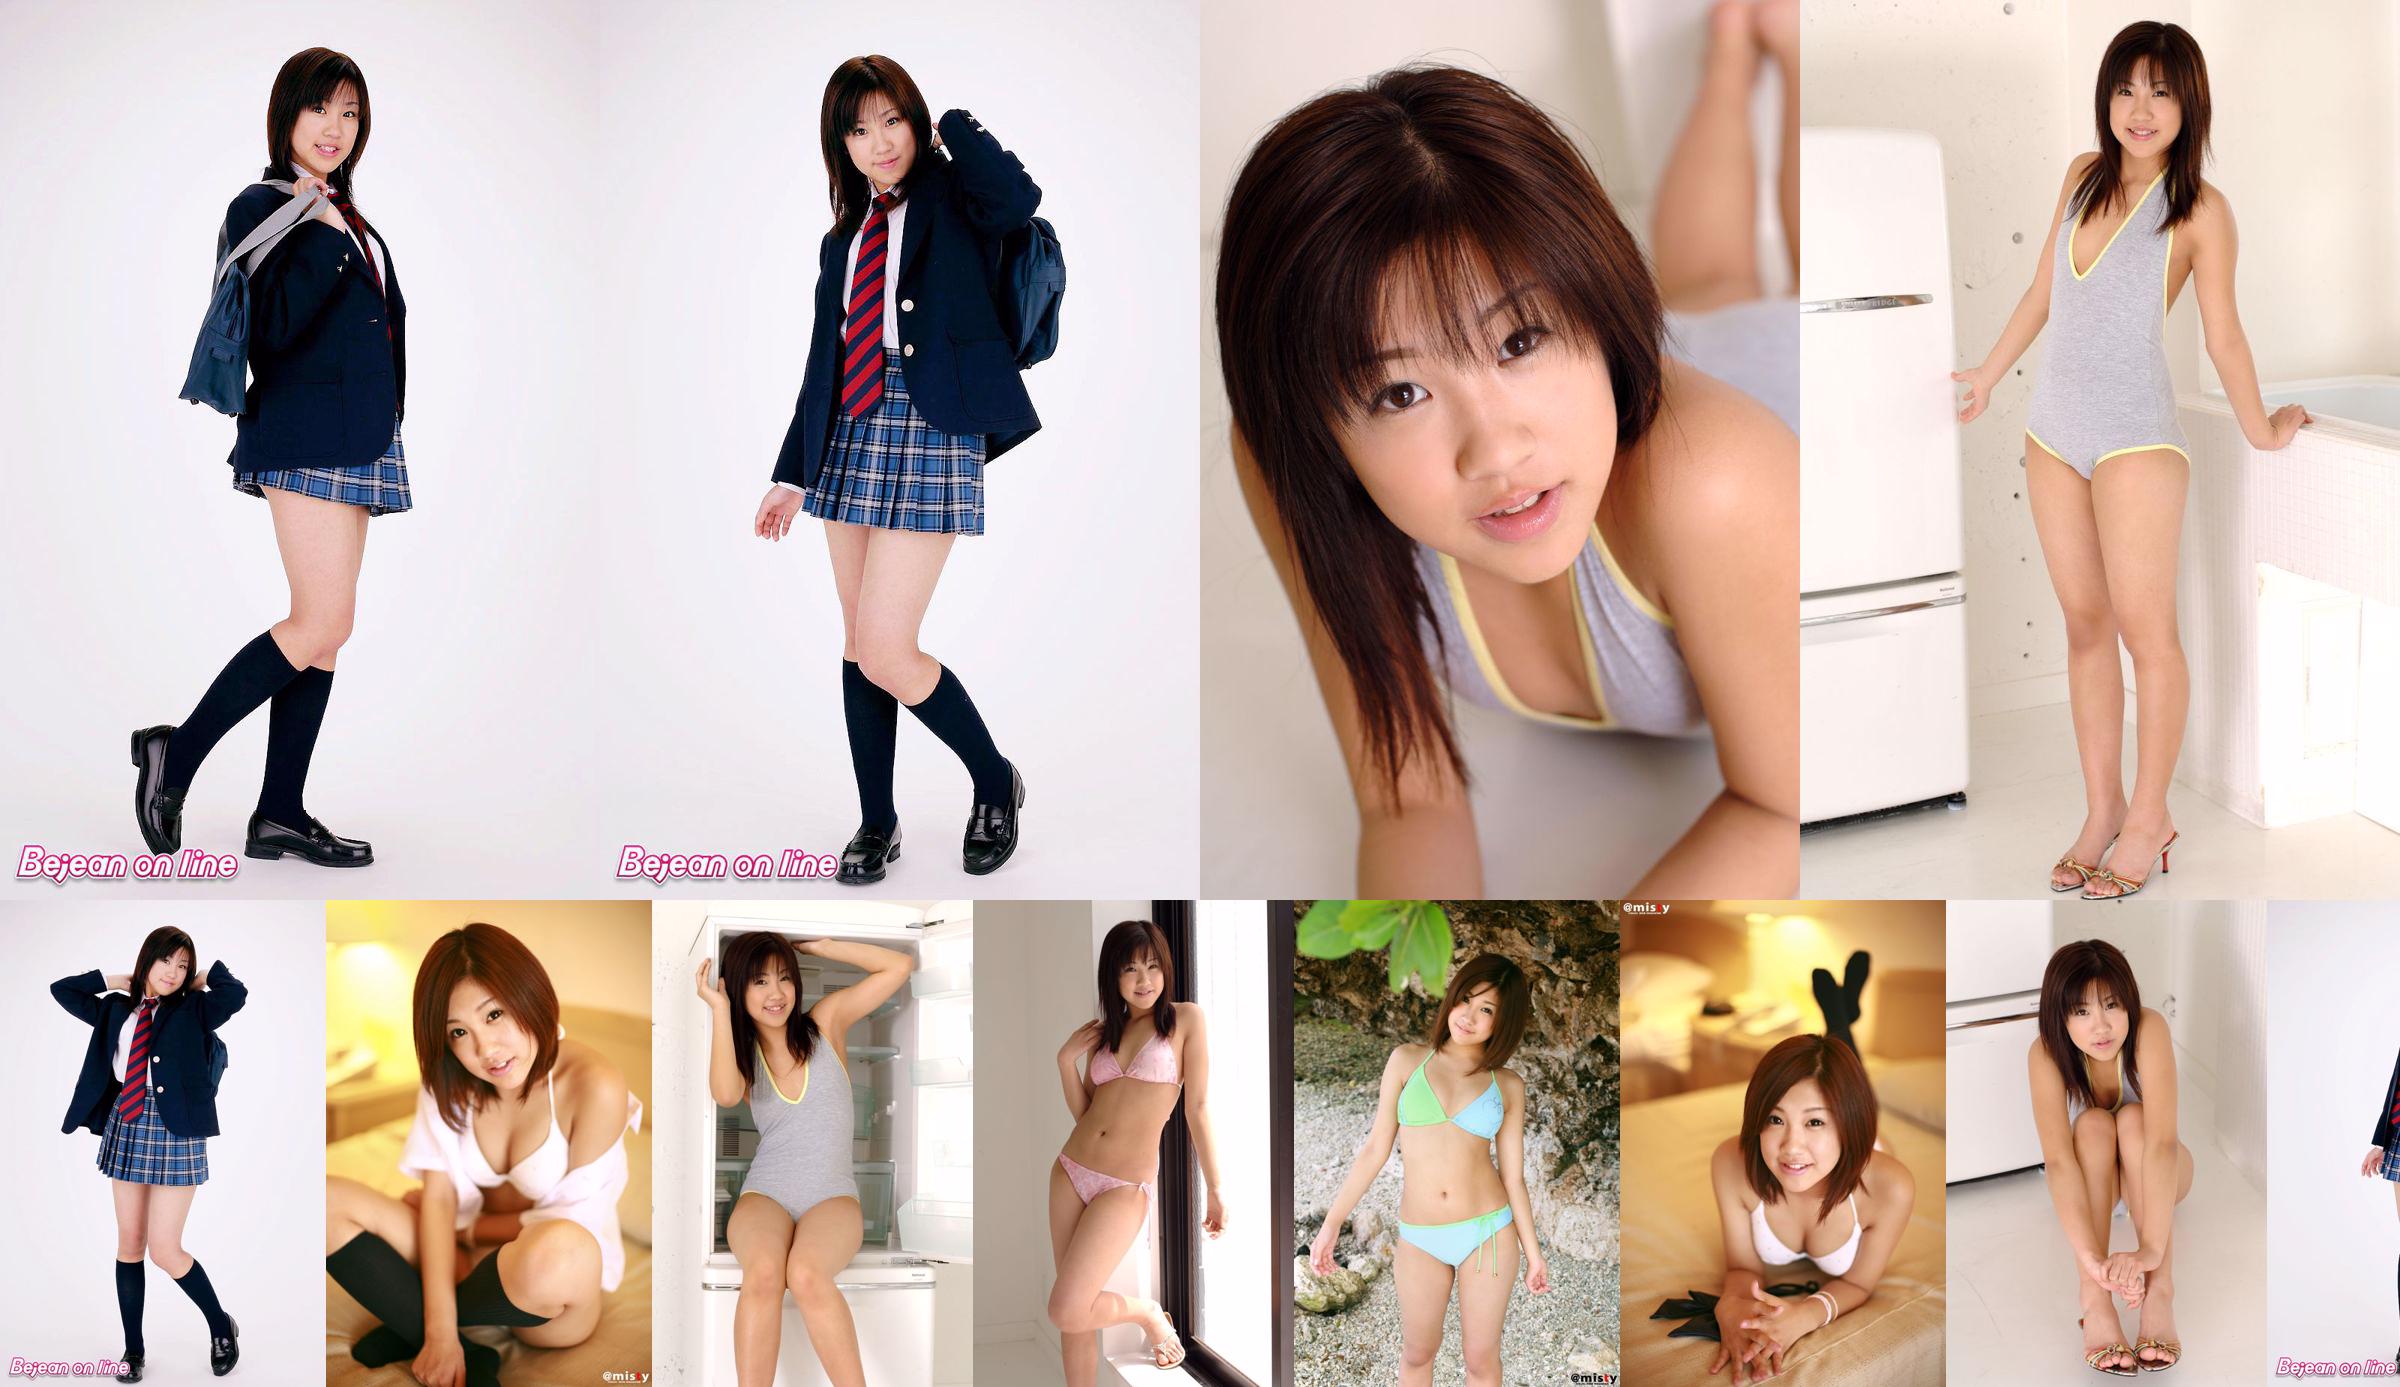 Private Bejean Girls’ School Maho Nagase 永瀬麻帆 [Bejean On Line] No.2132fb Page 4